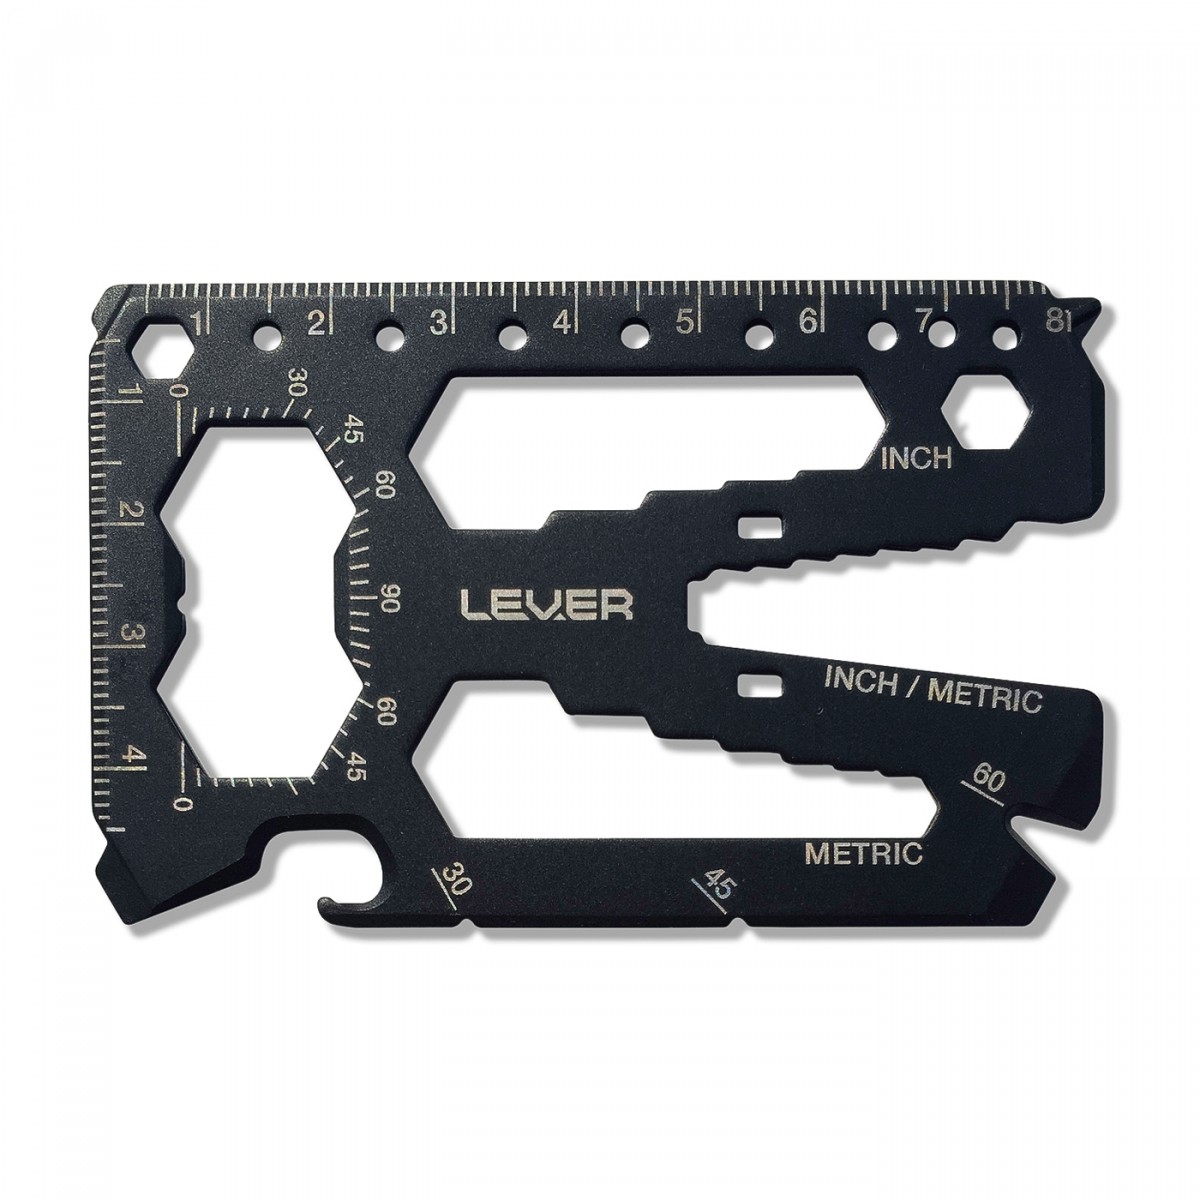 Lever Gear Toolcard Pro MultiTool Black PVD Coated Stainless Steel 